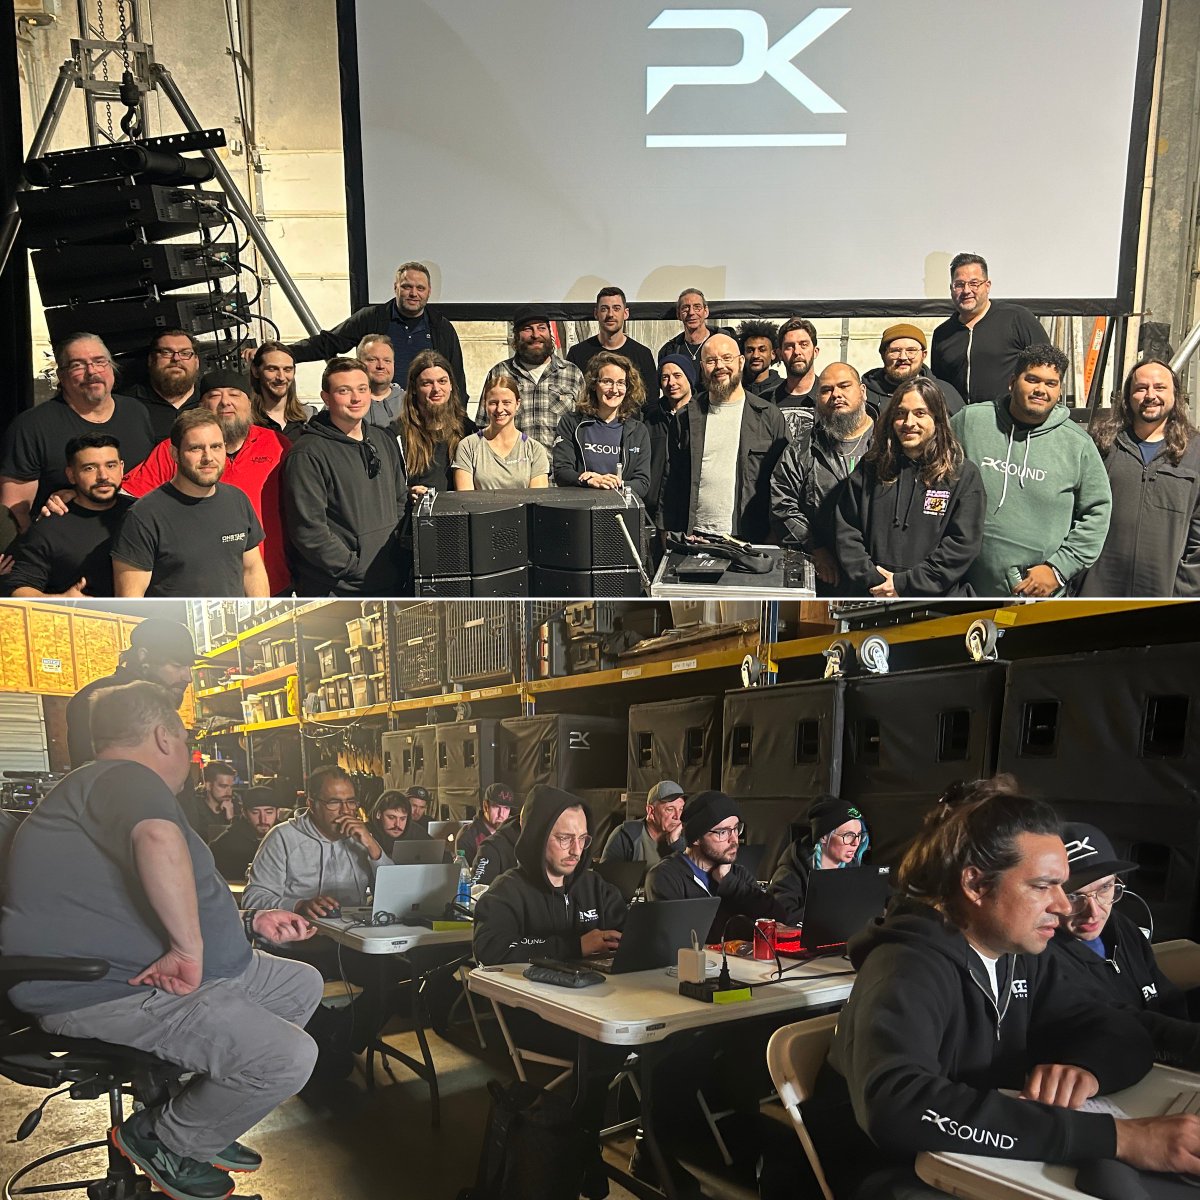 Thanks to all who took part in our #PKEducation Training & Certification events in Dallas (w @onstagesystems) & LA (w @bne_productions). Up next are St. Louis, Las Vegas & Nashville. If you're interested in being trained to deploy PK robotic line source systems, send us a msg!